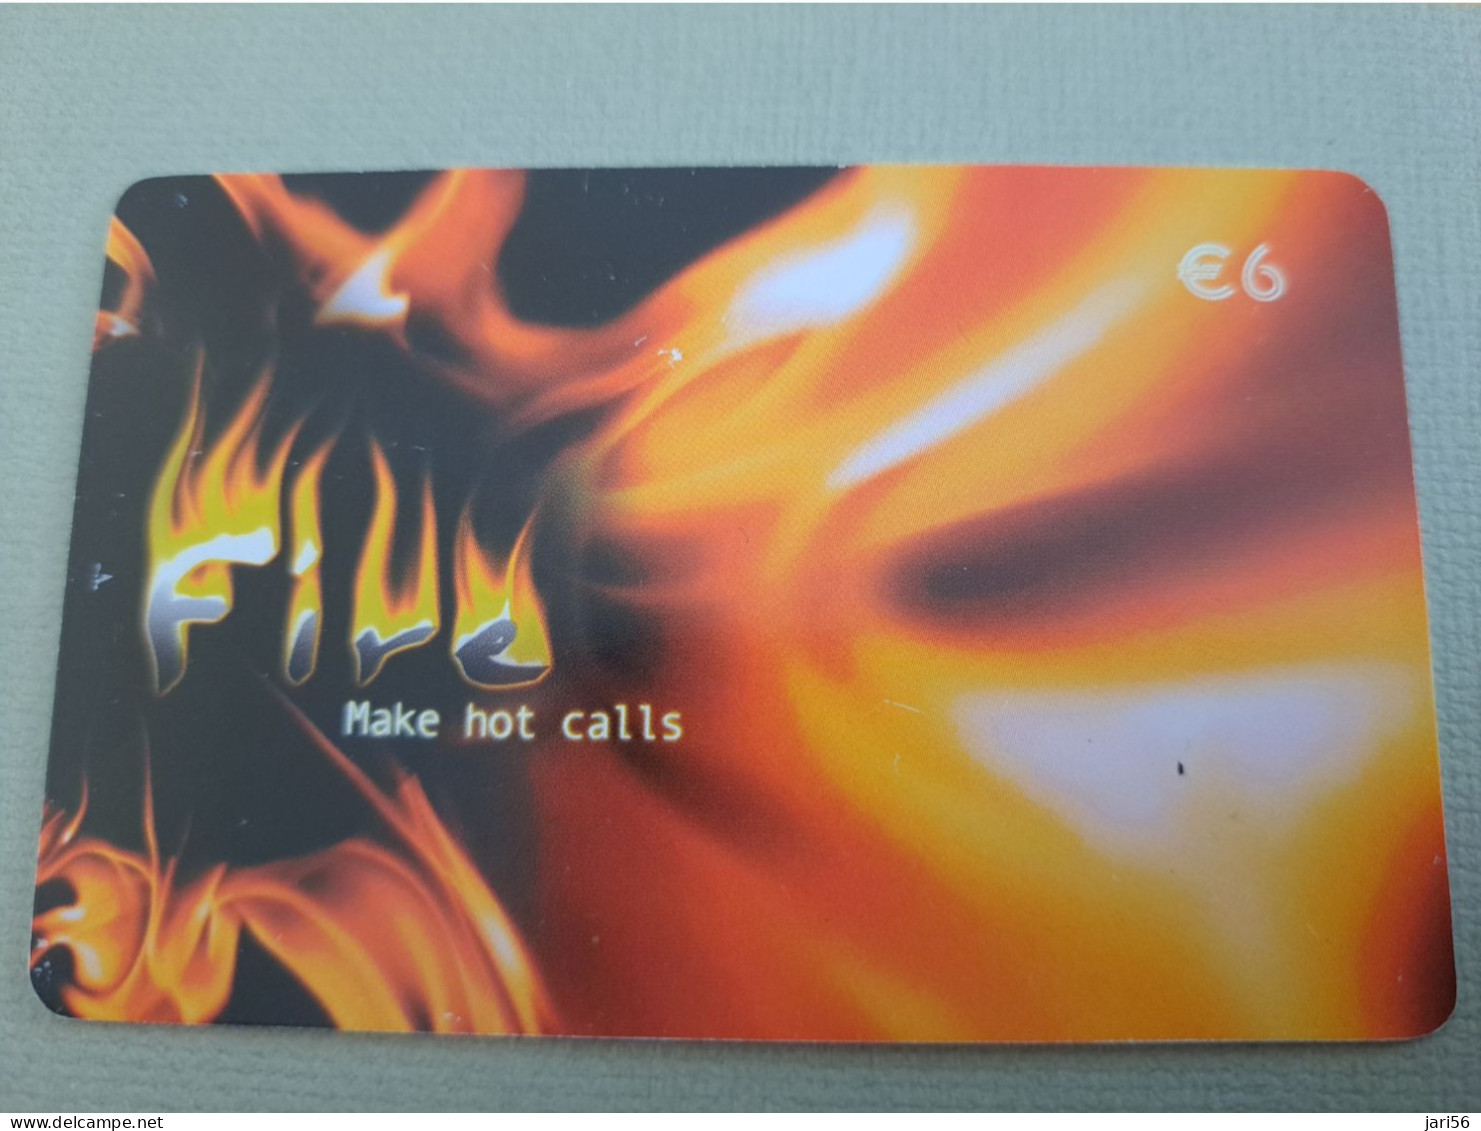 NETHERLANDS /  PREPAID / FIRE/ MAKE HOT CALLS  /  € 6,-  USED  ** 15254** - Private